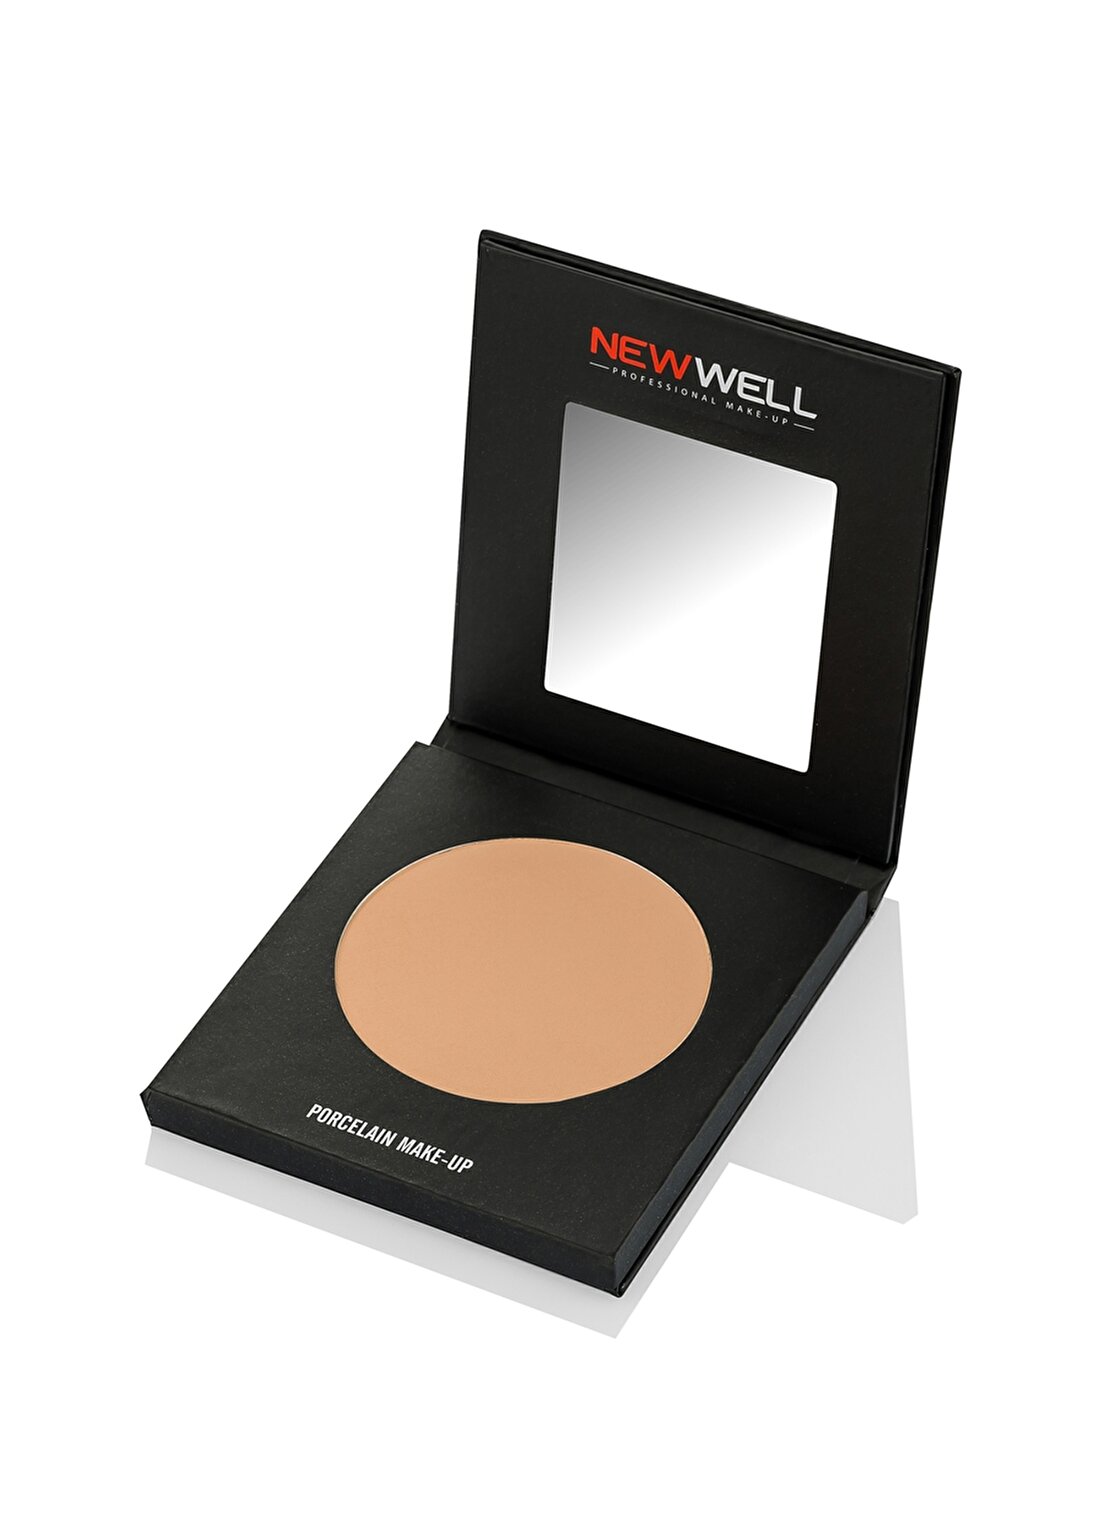 New Well Porcelain Make-Up Powder Pudra - NW 22